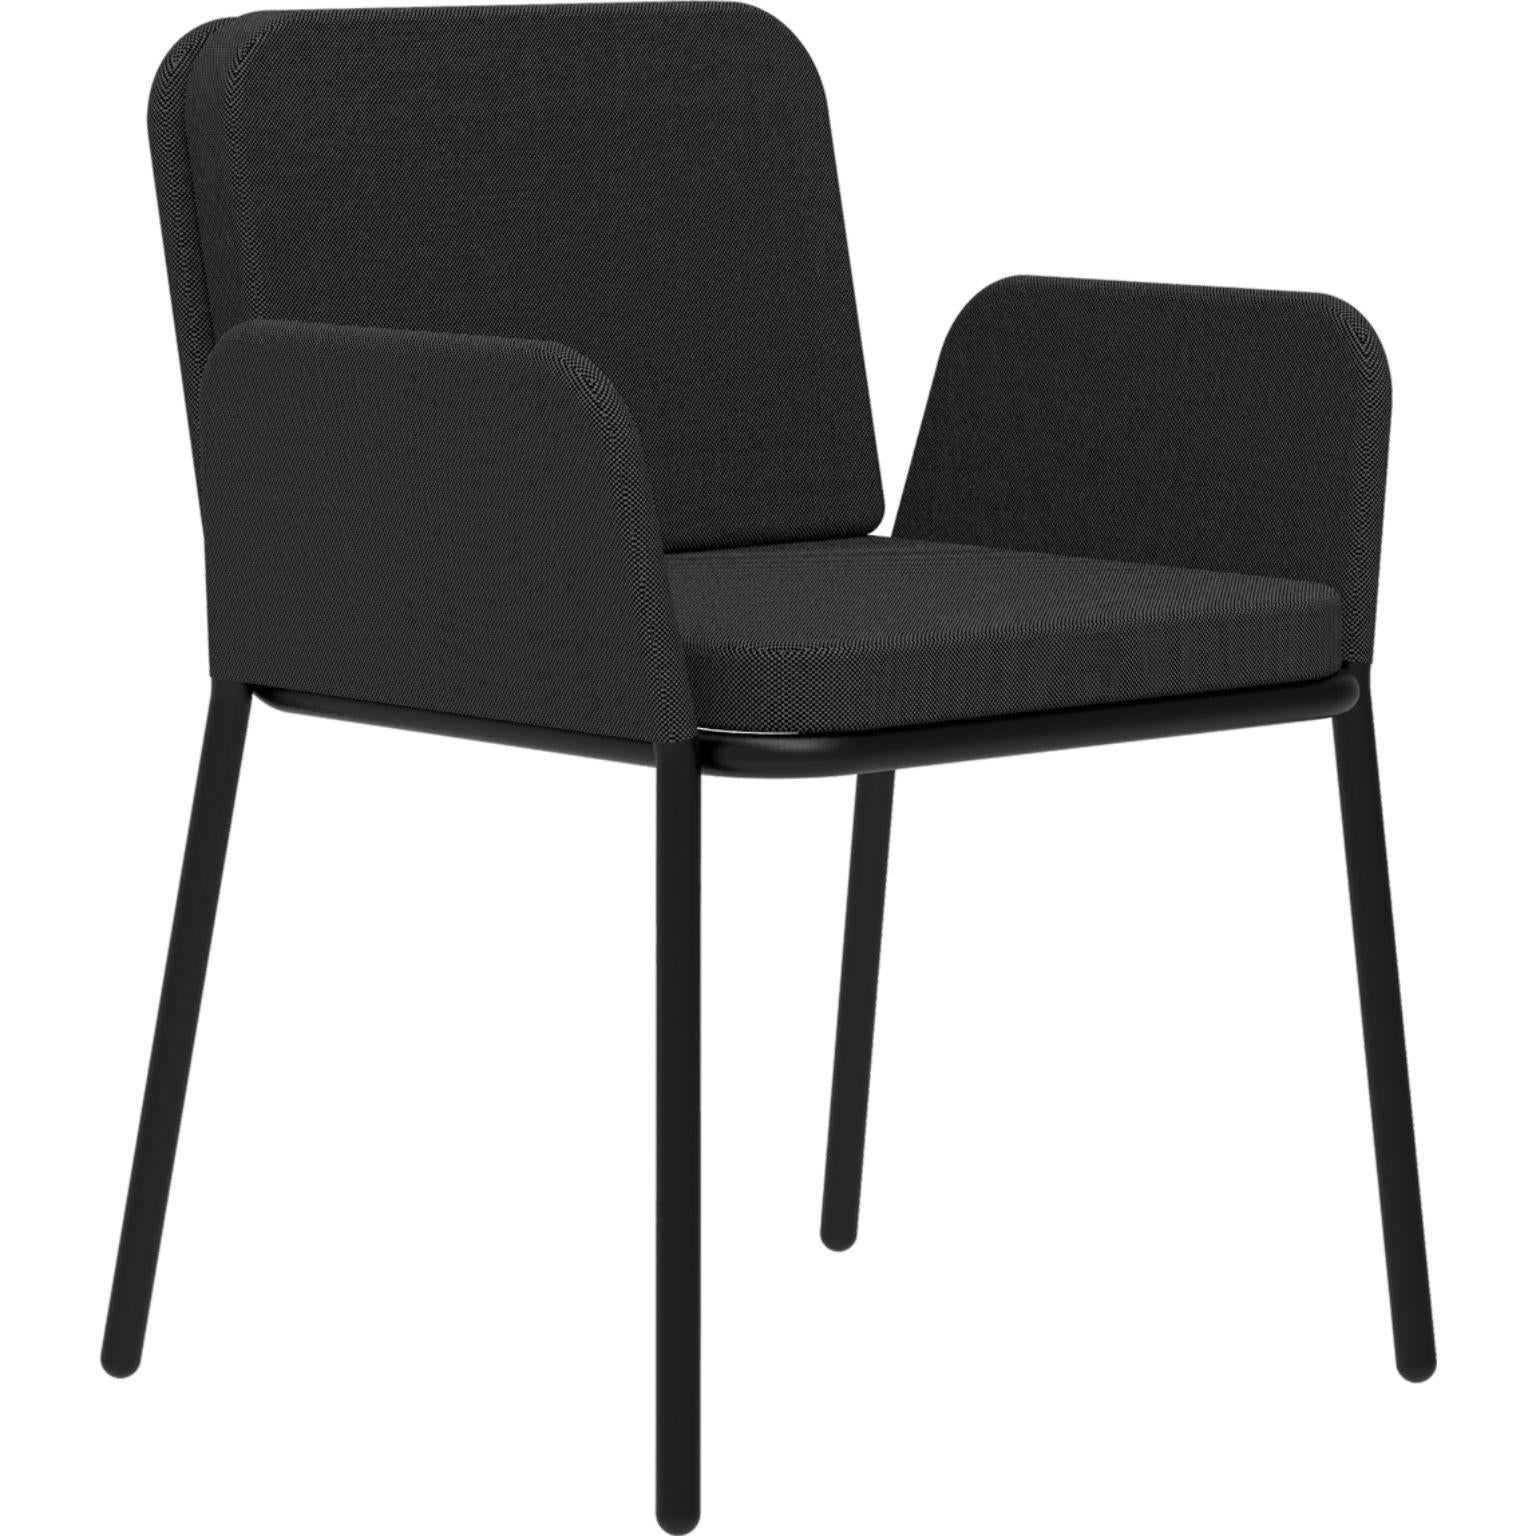 Cover black armchair by MOWEE.
Dimensions: D60 x W62 x H83 cm (seat height 48 cm).
Material: aluminium and upholstery.
Weight: 5 kg.
Also available in different colors and finishes.

An unmistakable collection for its beauty and robustness. A